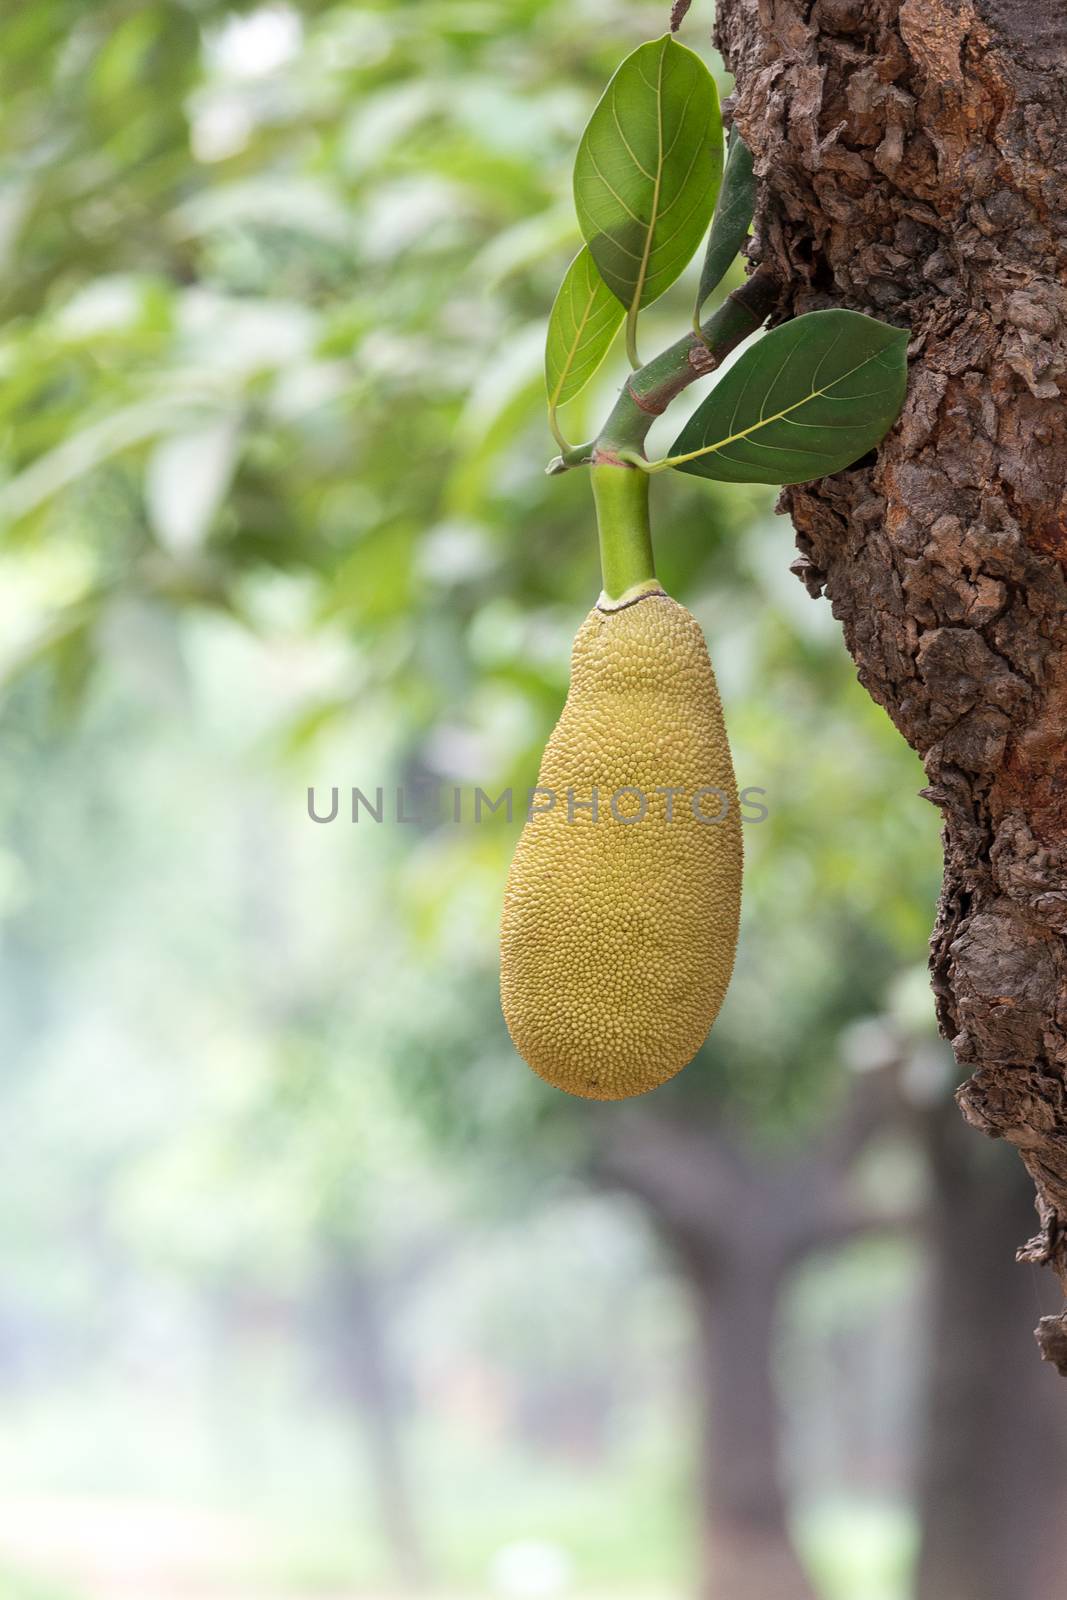 gree Jackfruit on the tree in the national park field